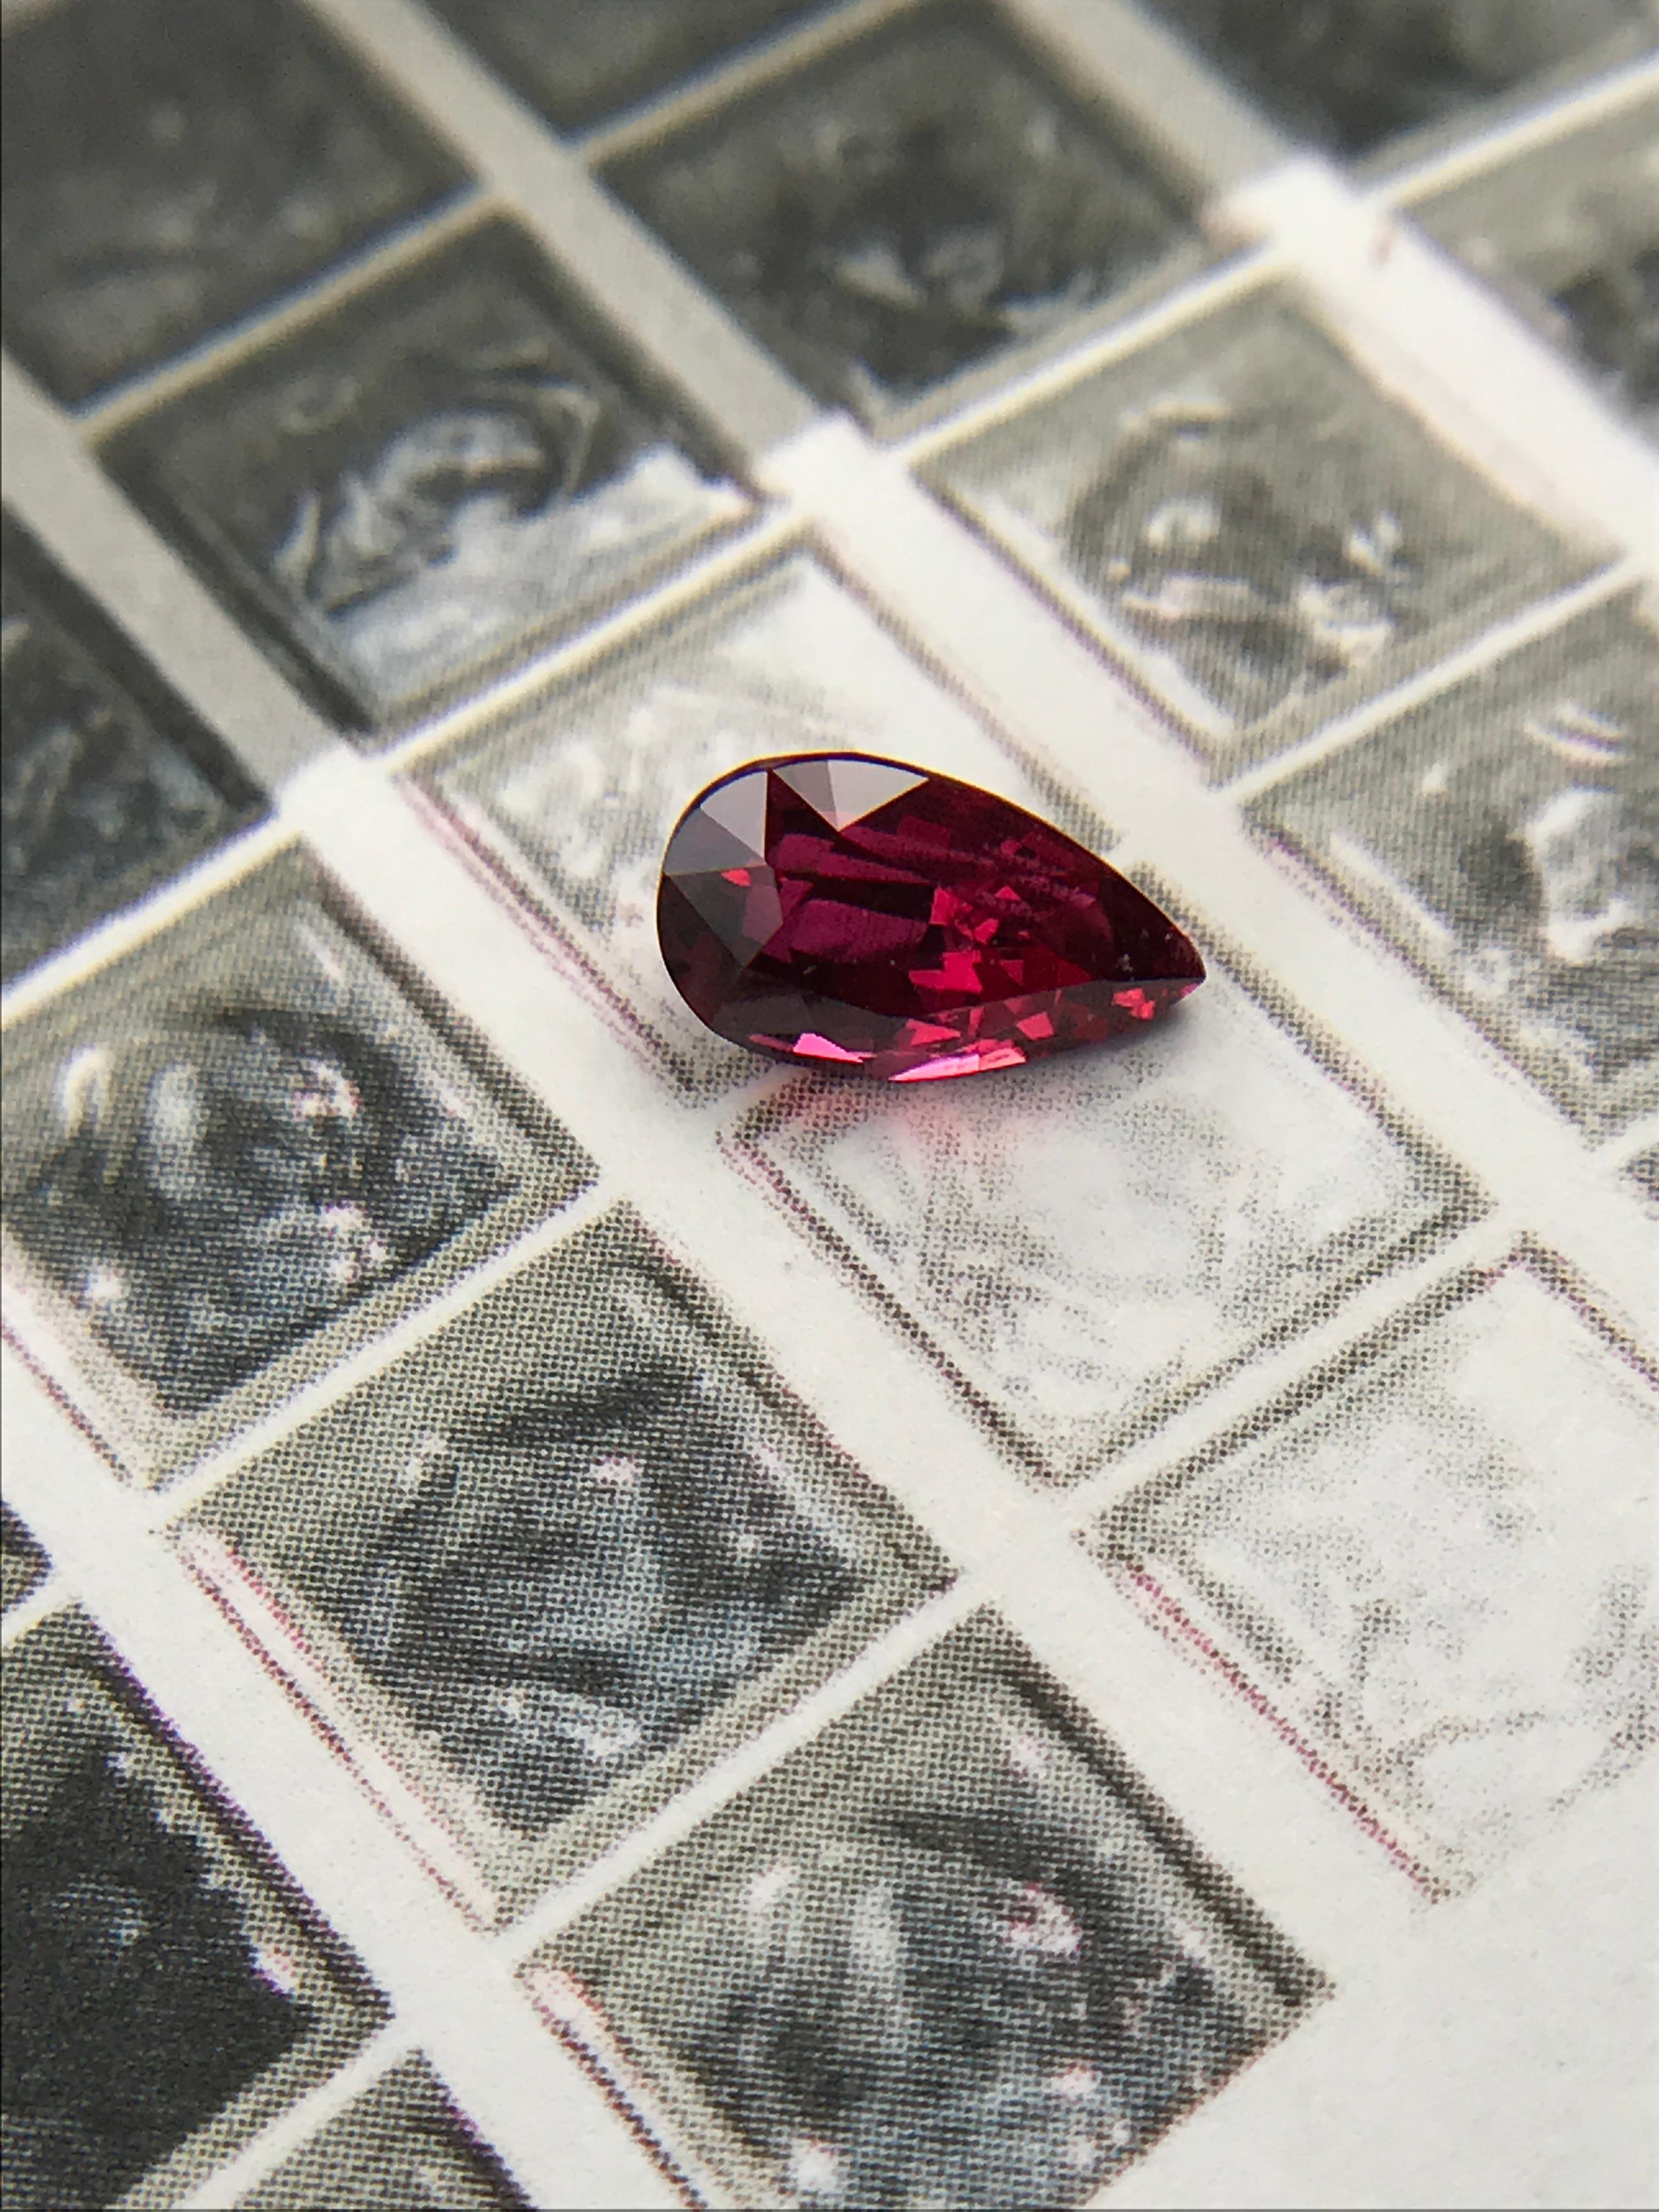 Pear Cut 1.01 Carat Natural Pear-Shaped Ruby For Sale